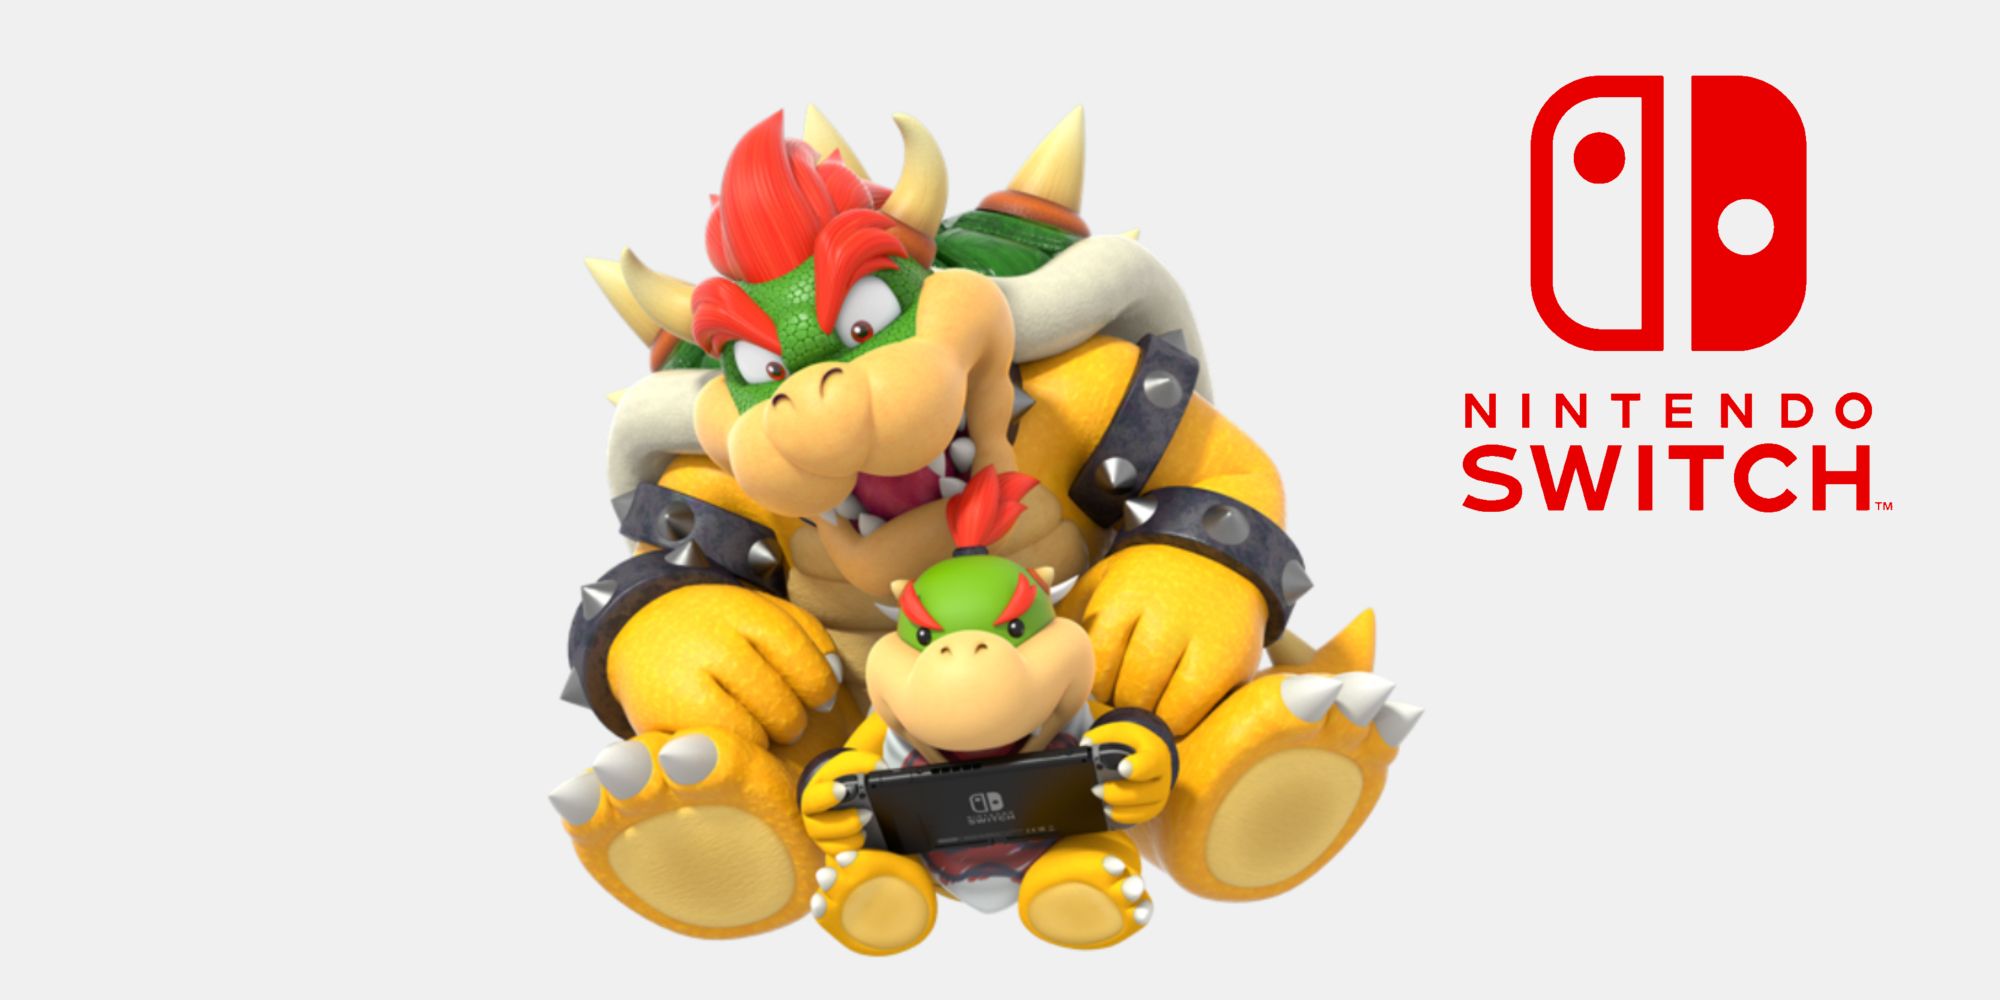 Nintendo Switch Bowser Jr playing on console with Bowser